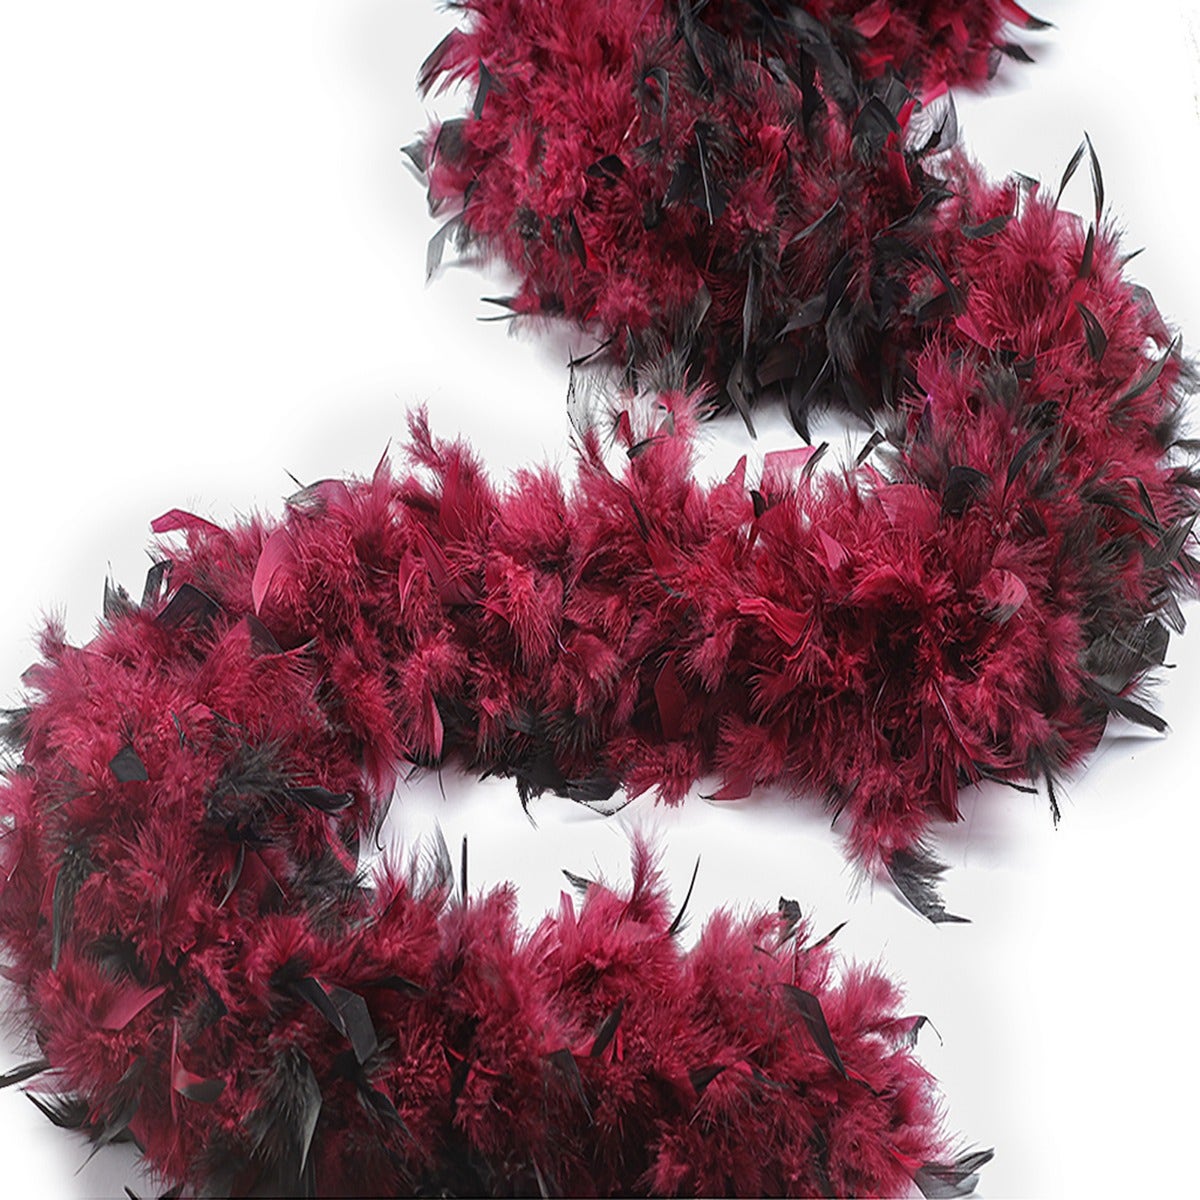 Tipped Chandelle Feather Boa - Heavyweight - Burgundy/Black